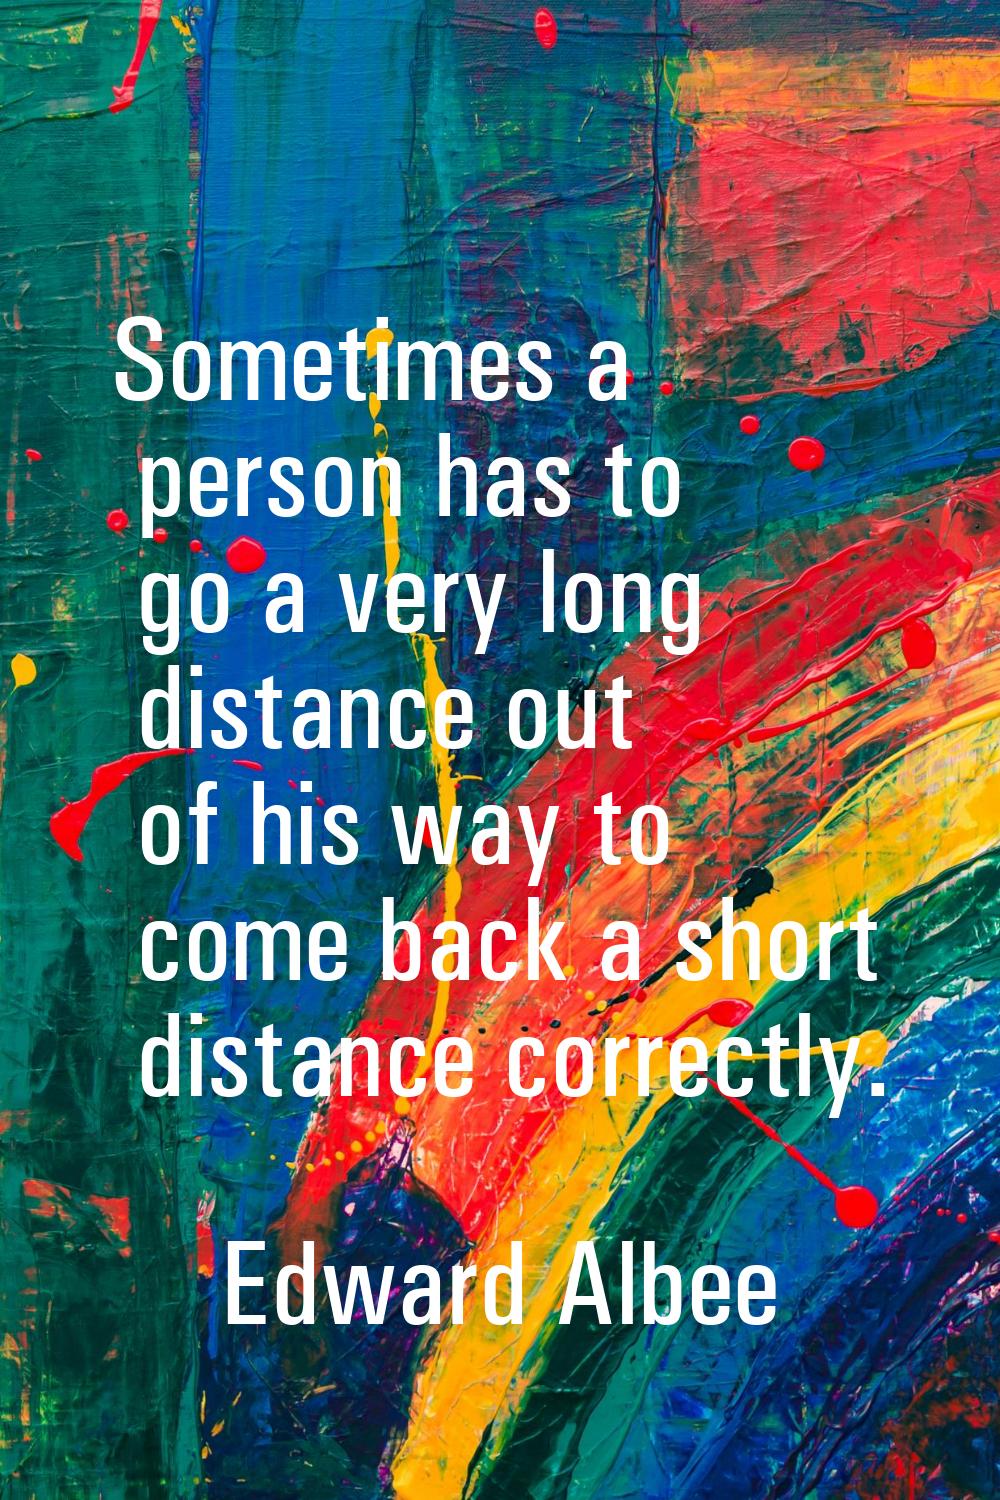 Sometimes a person has to go a very long distance out of his way to come back a short distance corr